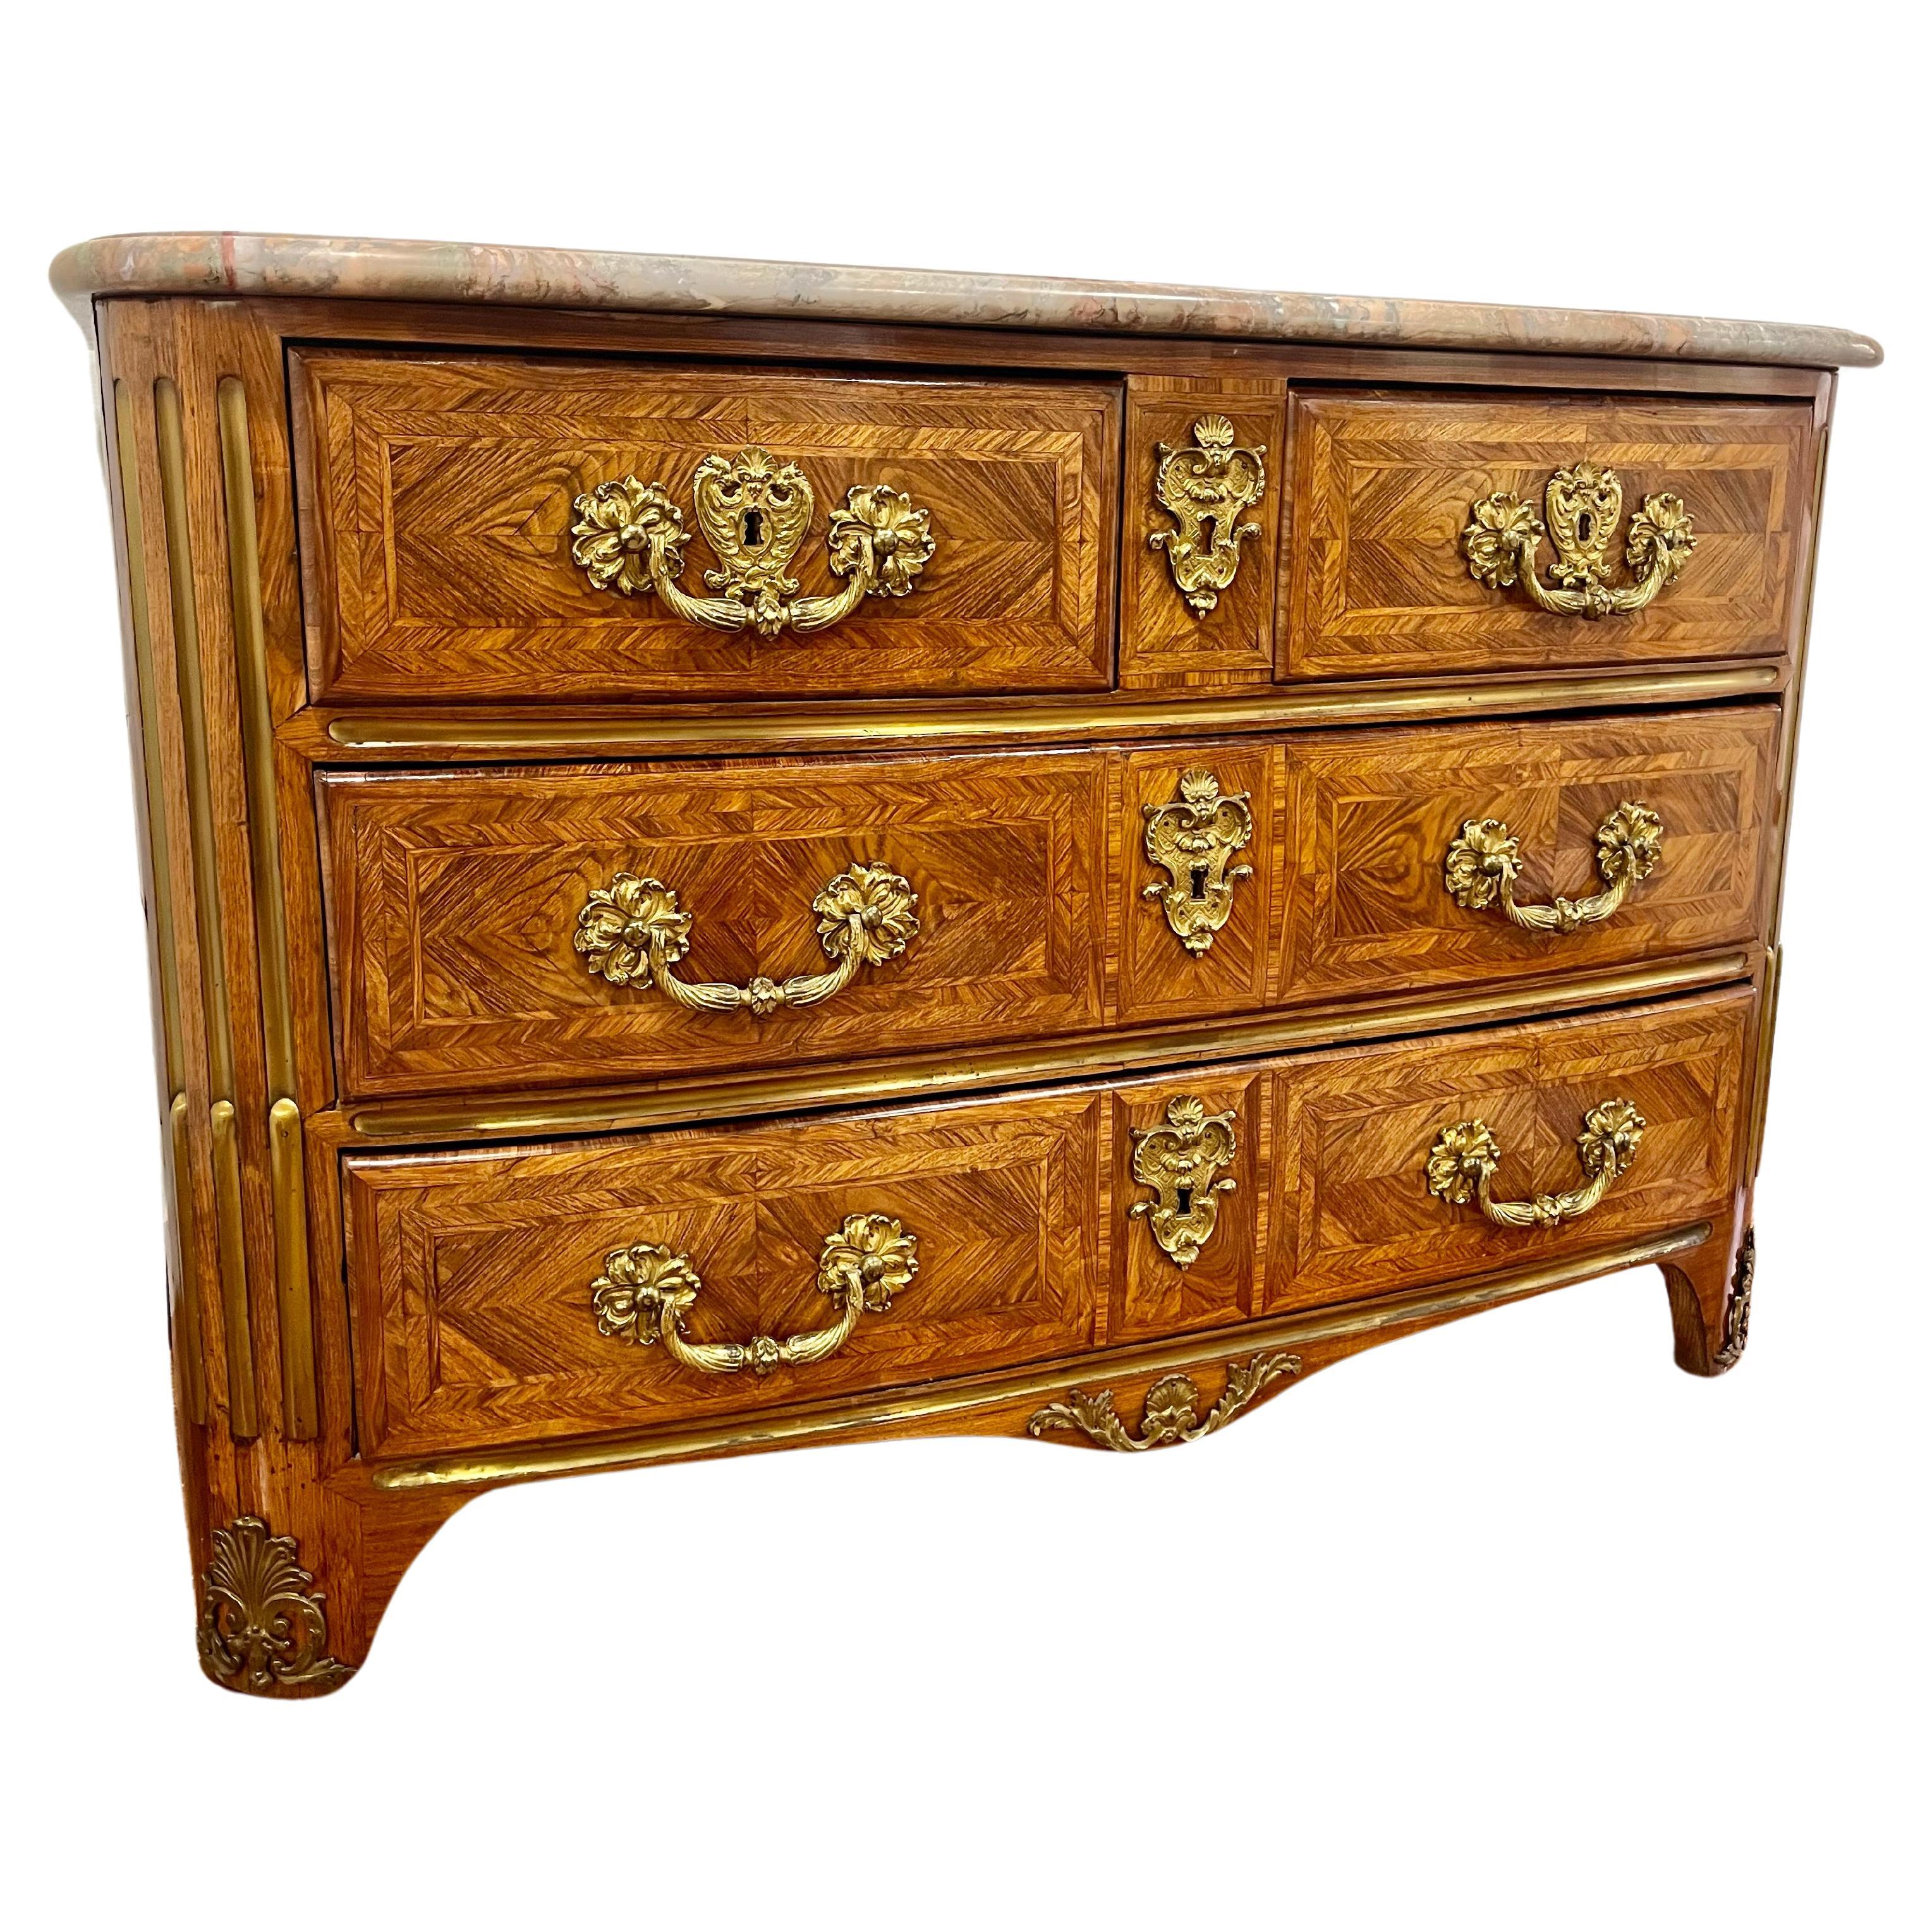 Régence French Regence Tulipwood and Kingwood Parquetry Commode For Sale